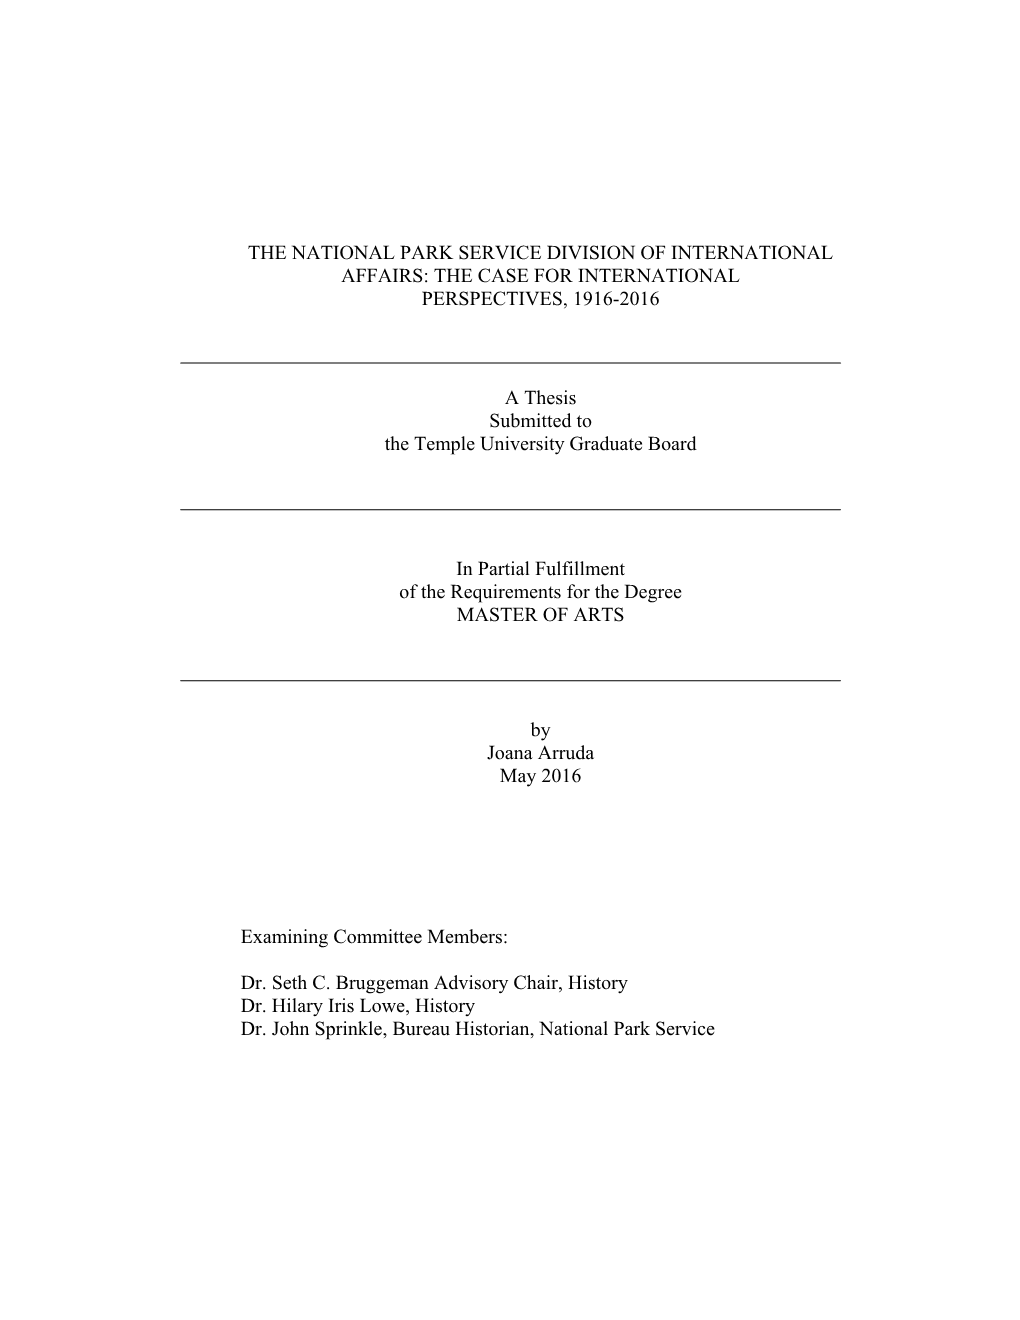 THE NATIONAL PARK SERVICE DIVISION of INTERNATIONAL AFFAIRS: the CASE for INTERNATIONAL PERSPECTIVES, 1916-2016 a Thesis Submitt